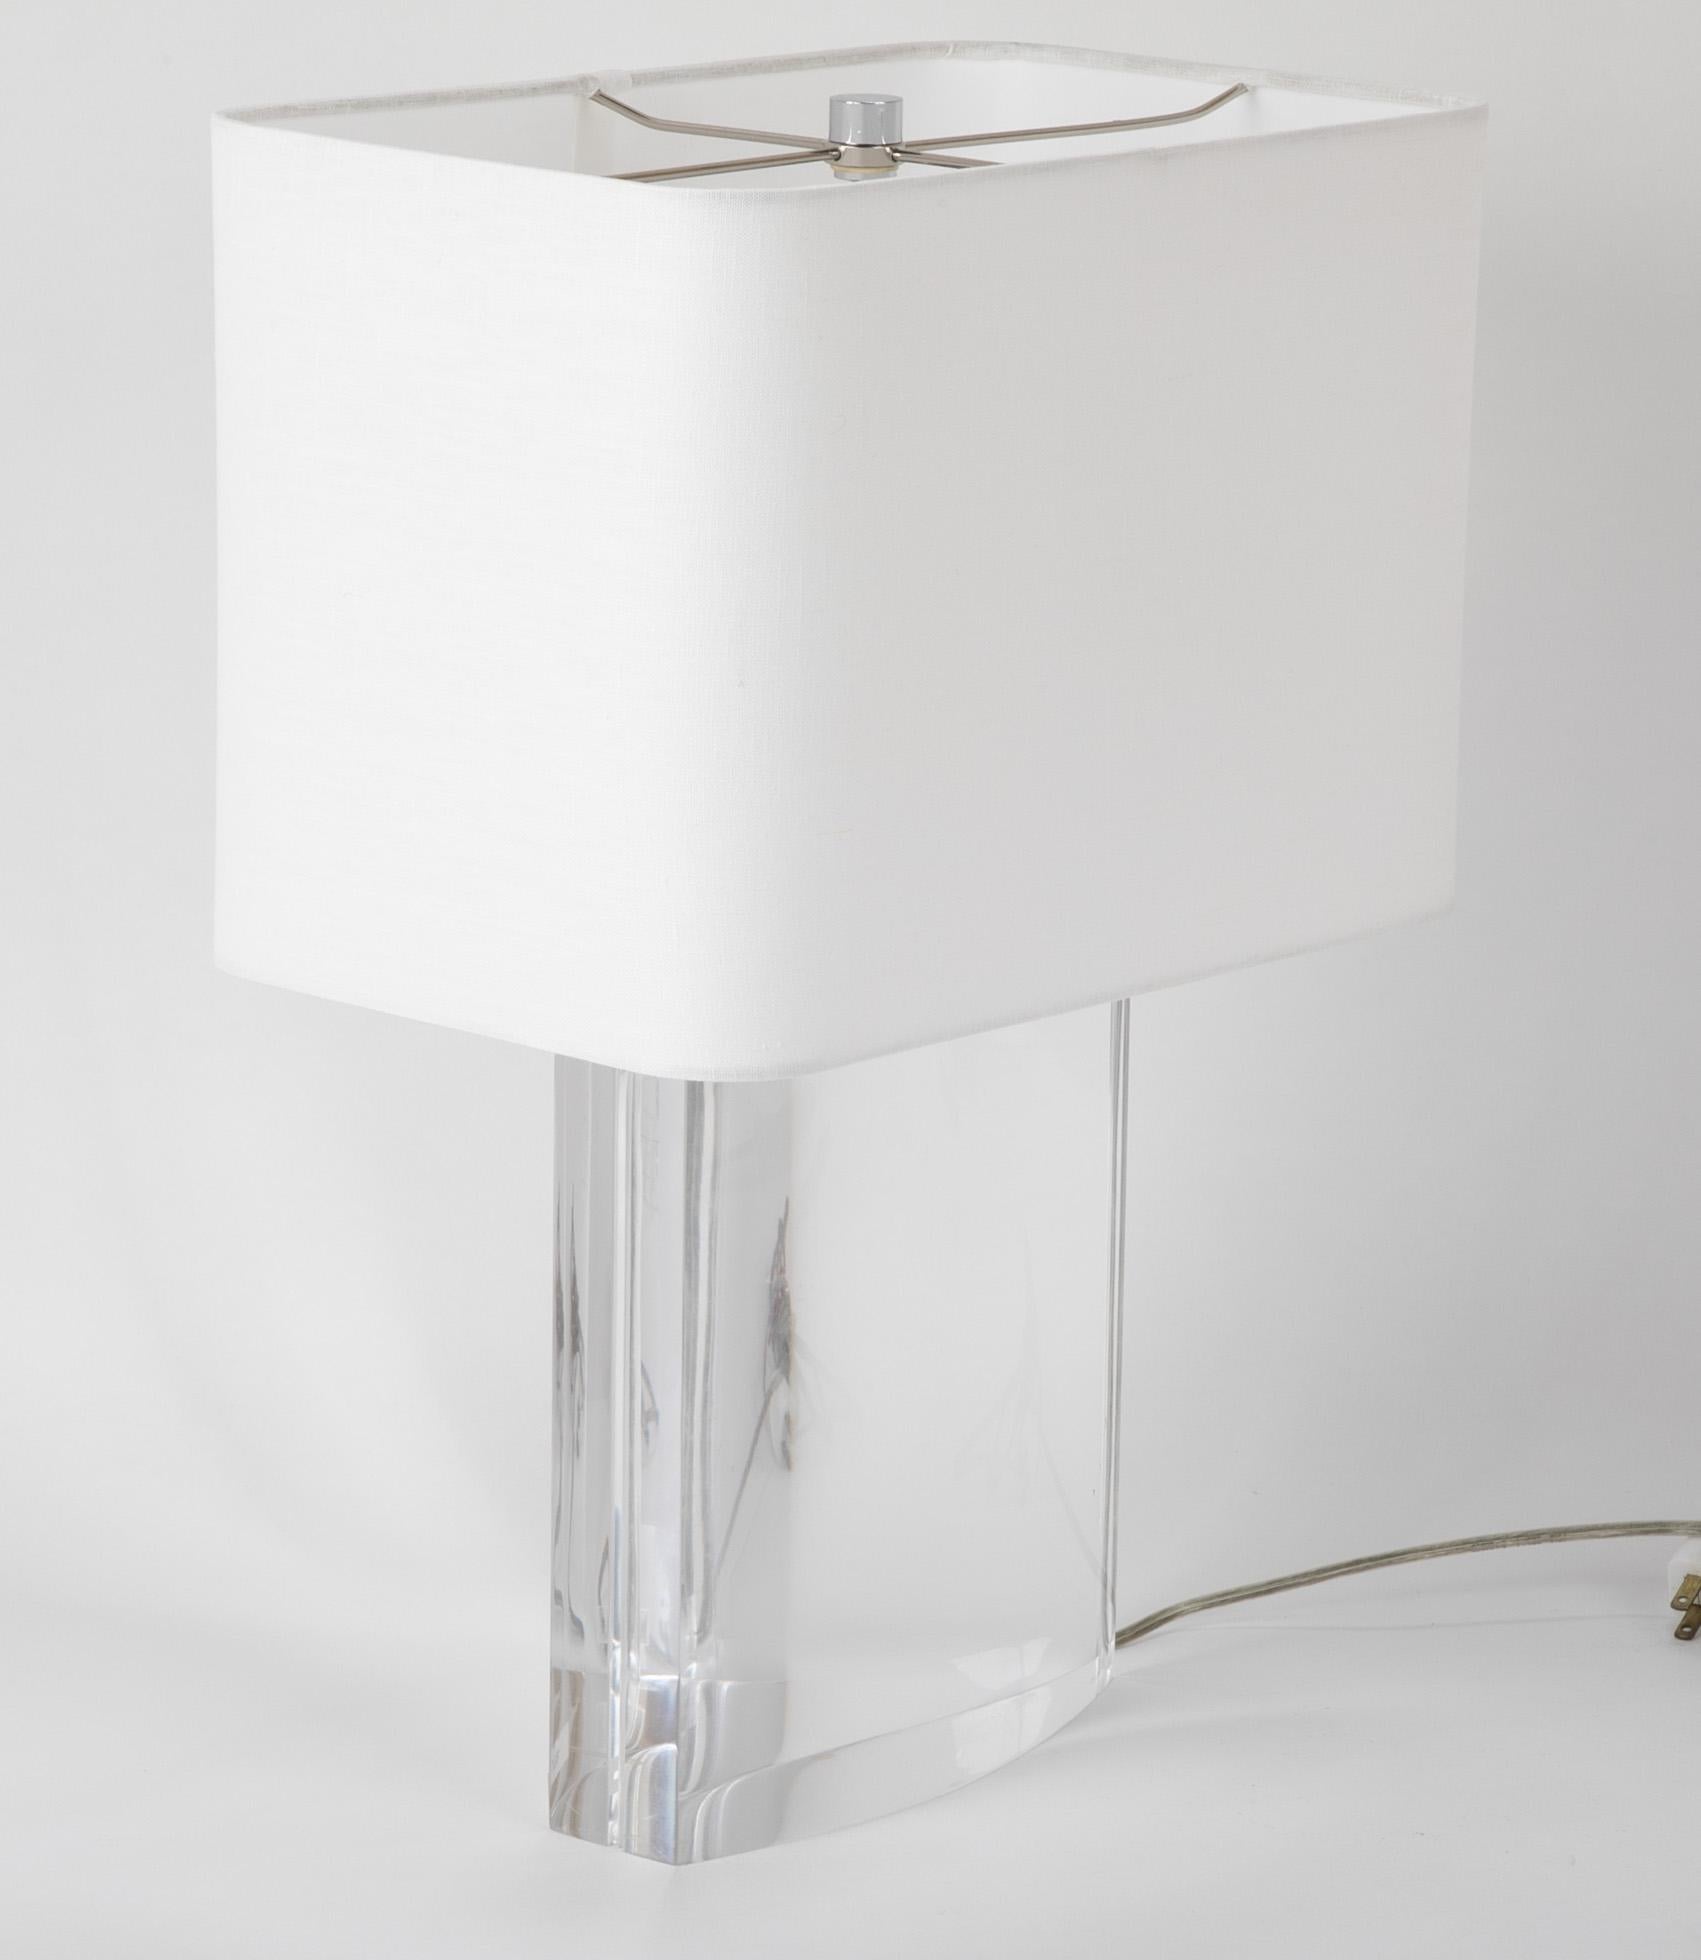 A beautiful Lucite table lamp in the style of Karl Springer.